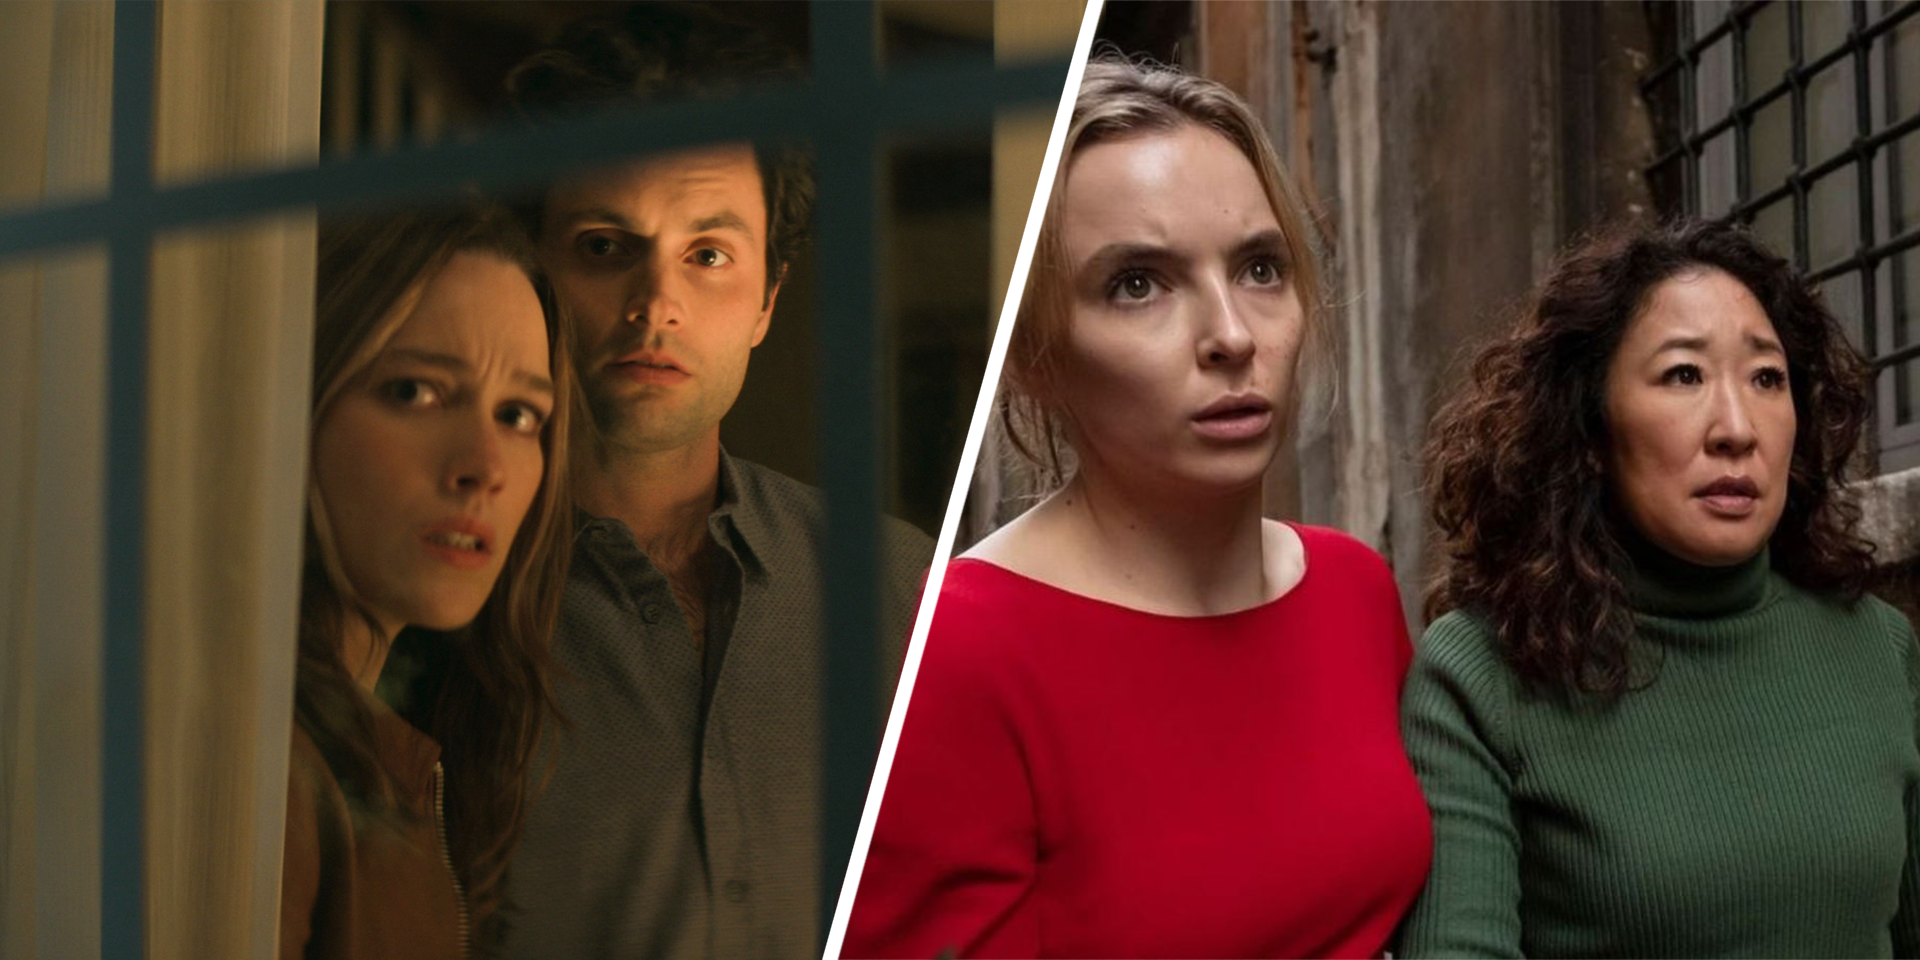 10 Most Toxic Relationships on TV (Love and Joe from You) (Villanelle and Eve from Killing Eve)